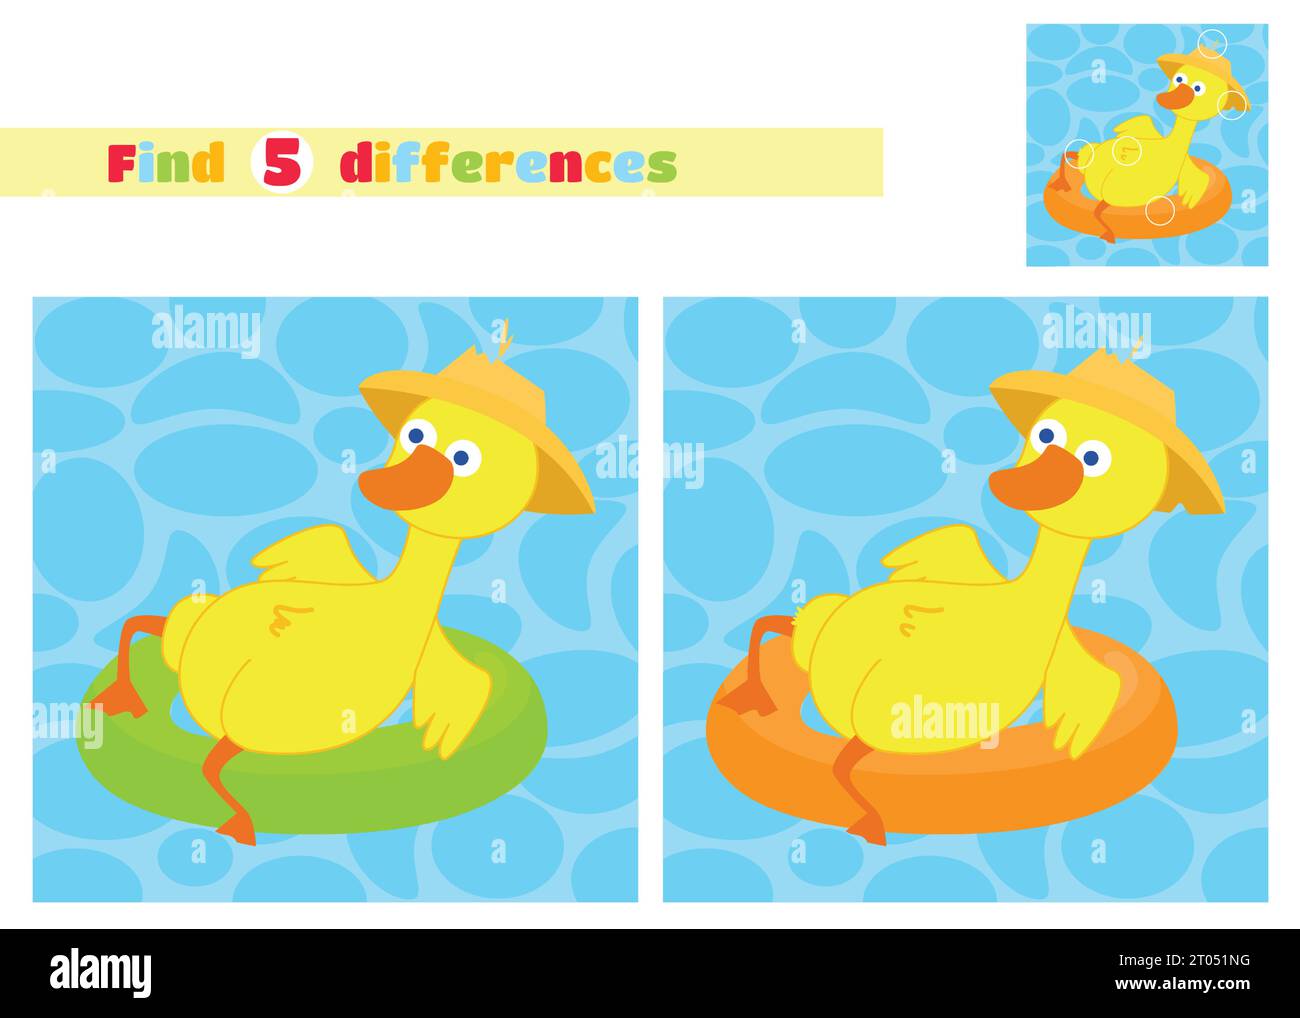 Find the differences. A duck in a hat floats on an inflatable circle on the water in a cartoon style. An educational game for children. Stock Vector